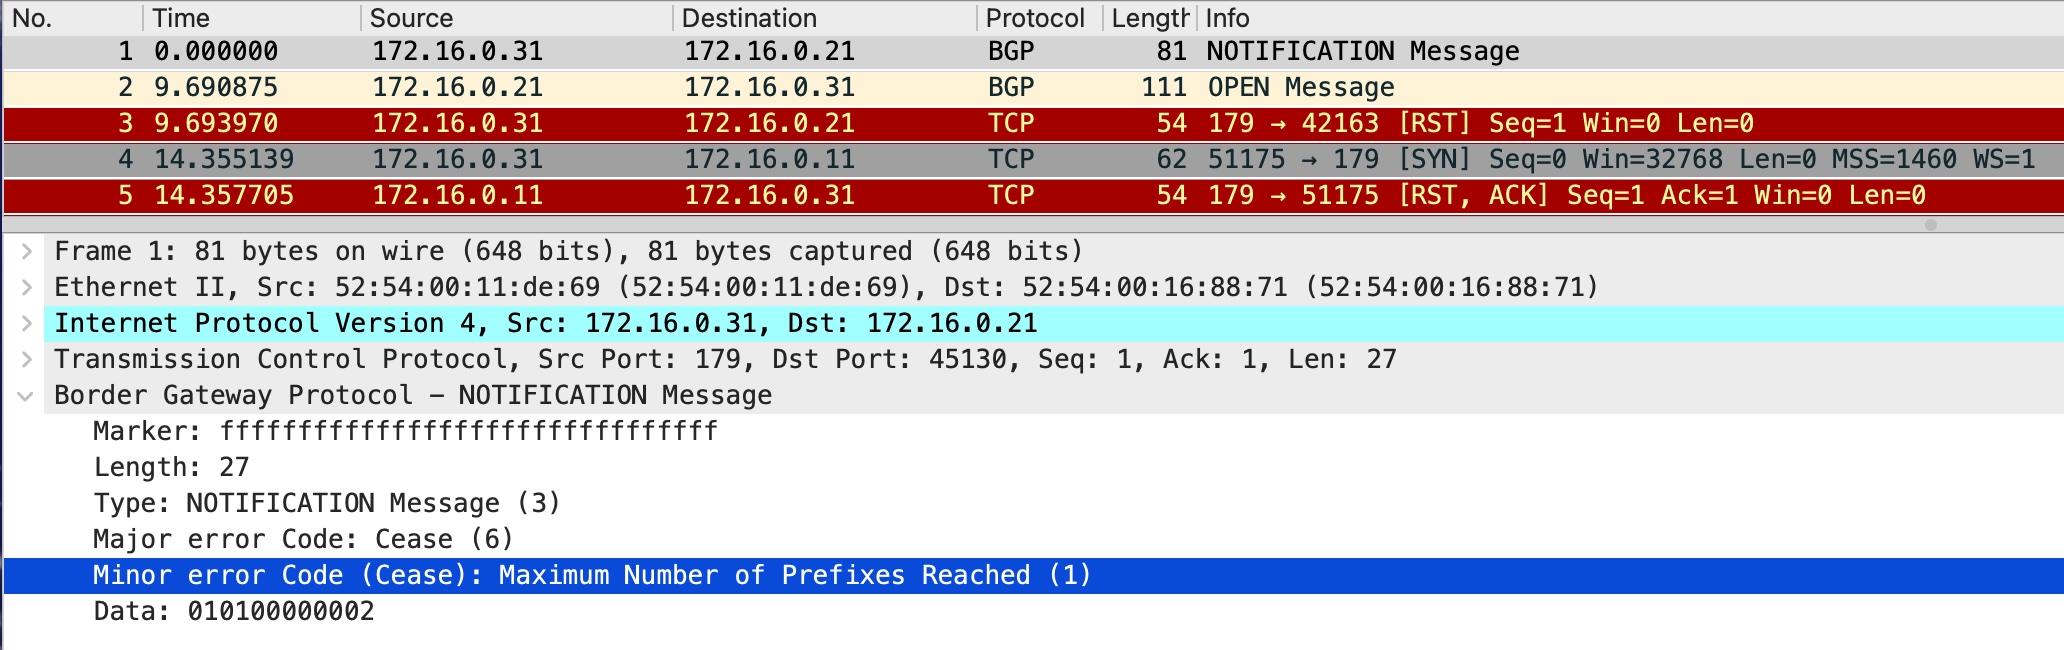 here&rsquo;s PCAP again - just OPEN messages with TCP resets in return